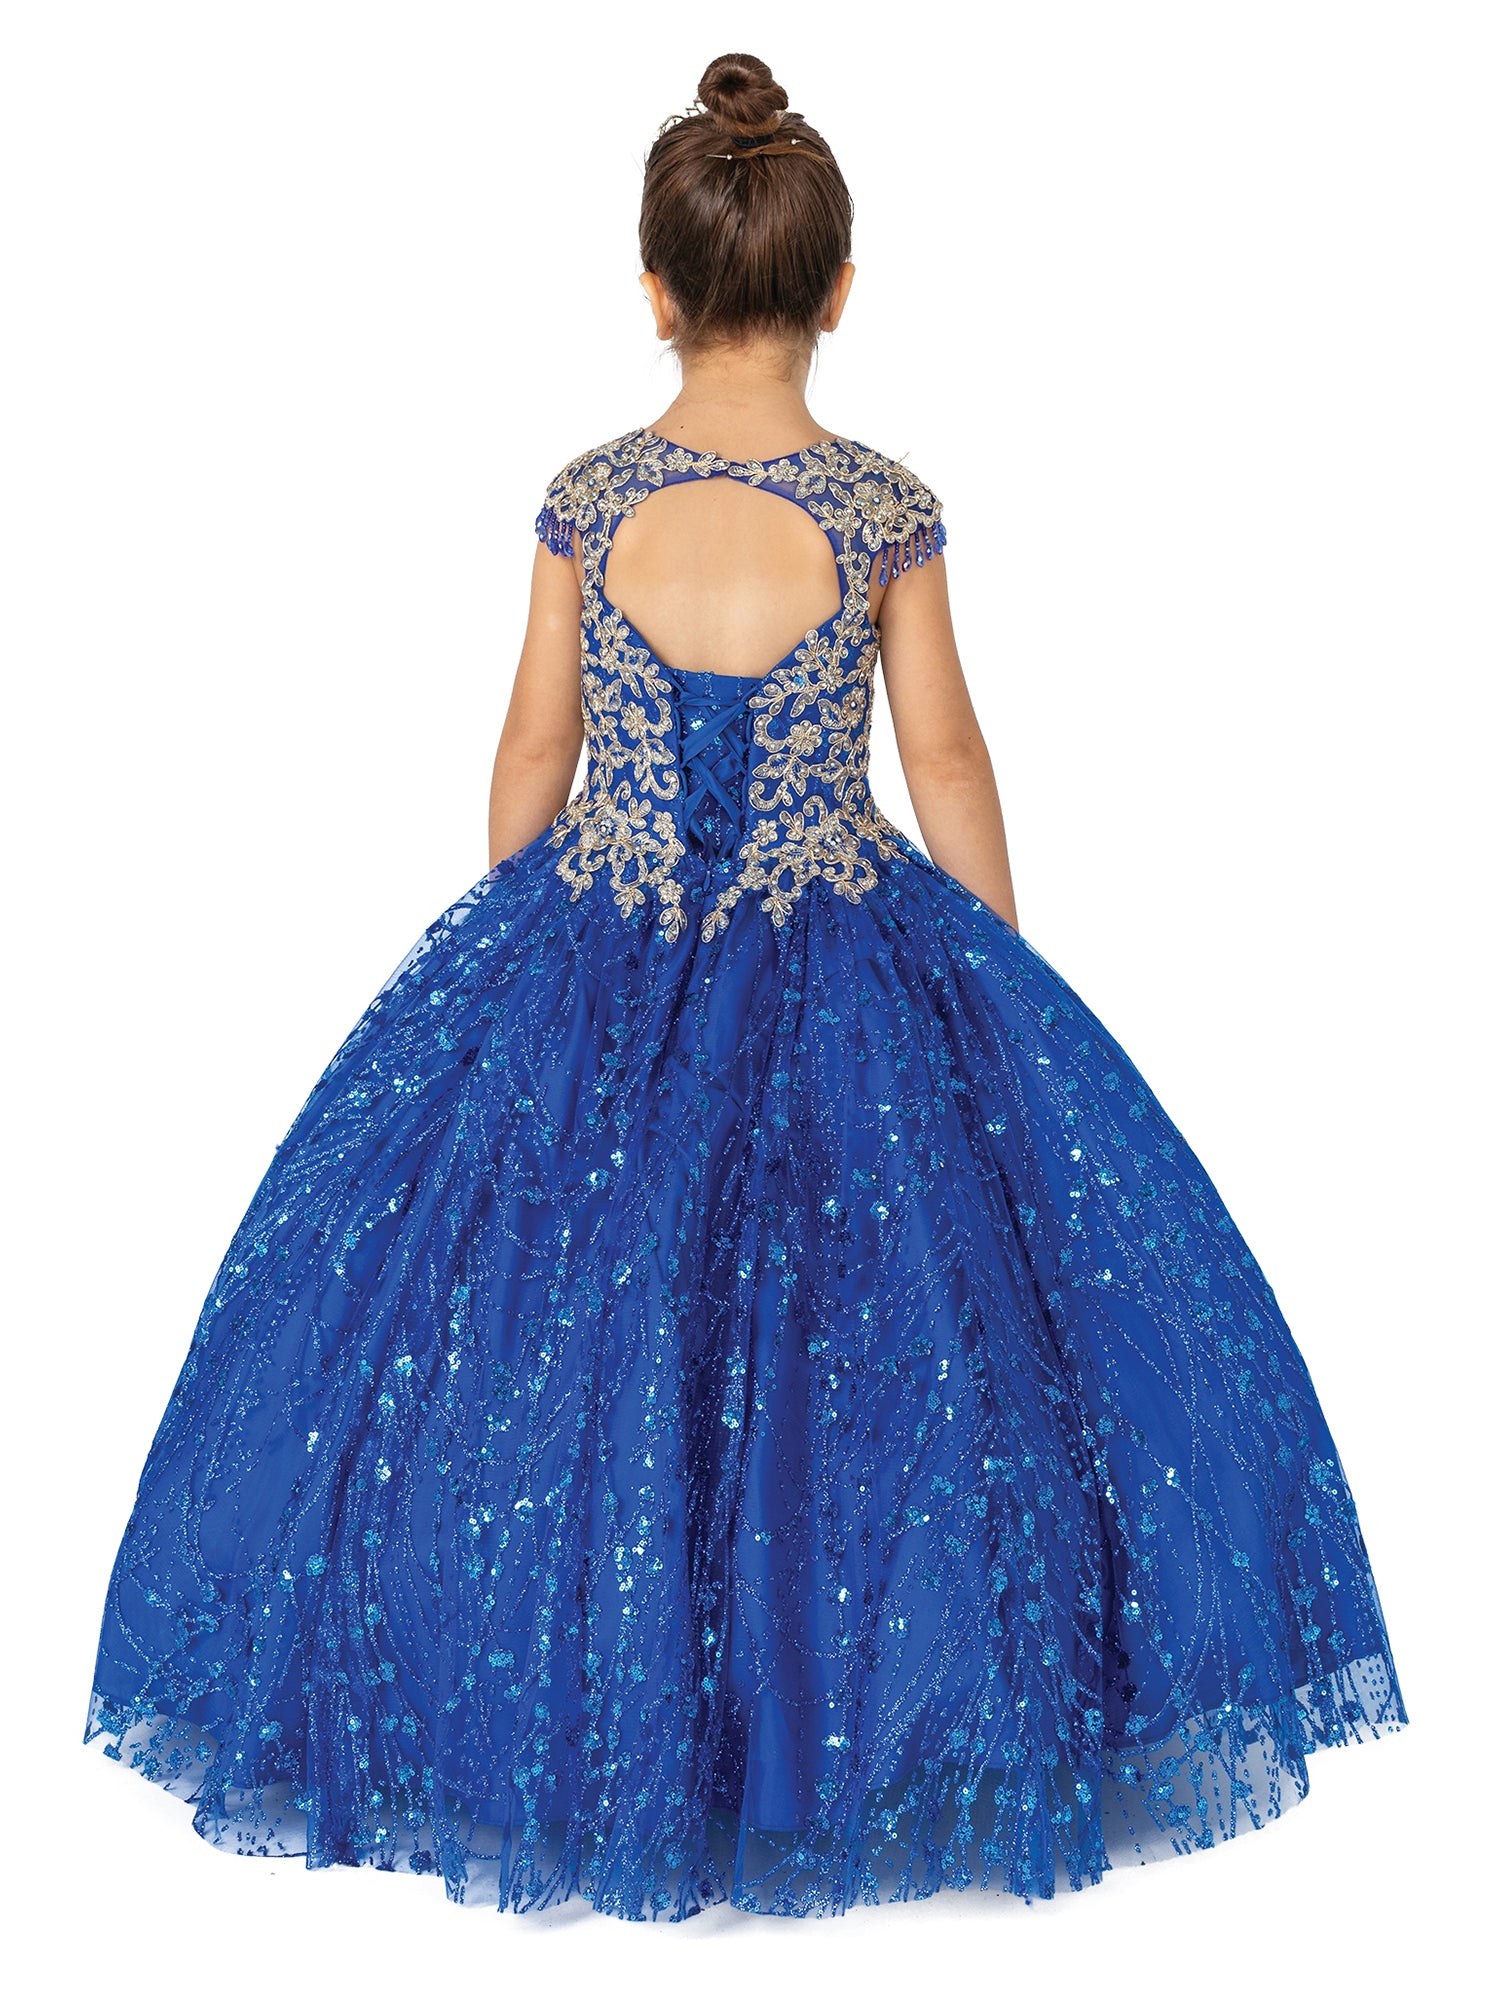 DQ K713 Size 4, 6 Royal Girls Ballgown Formal Dress Fringe Cap Sleeve Pageant Gown  Fabric: Glitter Embellishments Neckline: Sweetheart Sleeve: Sleeveless, Cap Sleeves Skirt: Ballgown, A-line, Sweep Train Back: Corset, Open Colors: Royal Blue Sizes: 4, 6 Available Sizes: 4, 6  Available Colors: Royal Blue